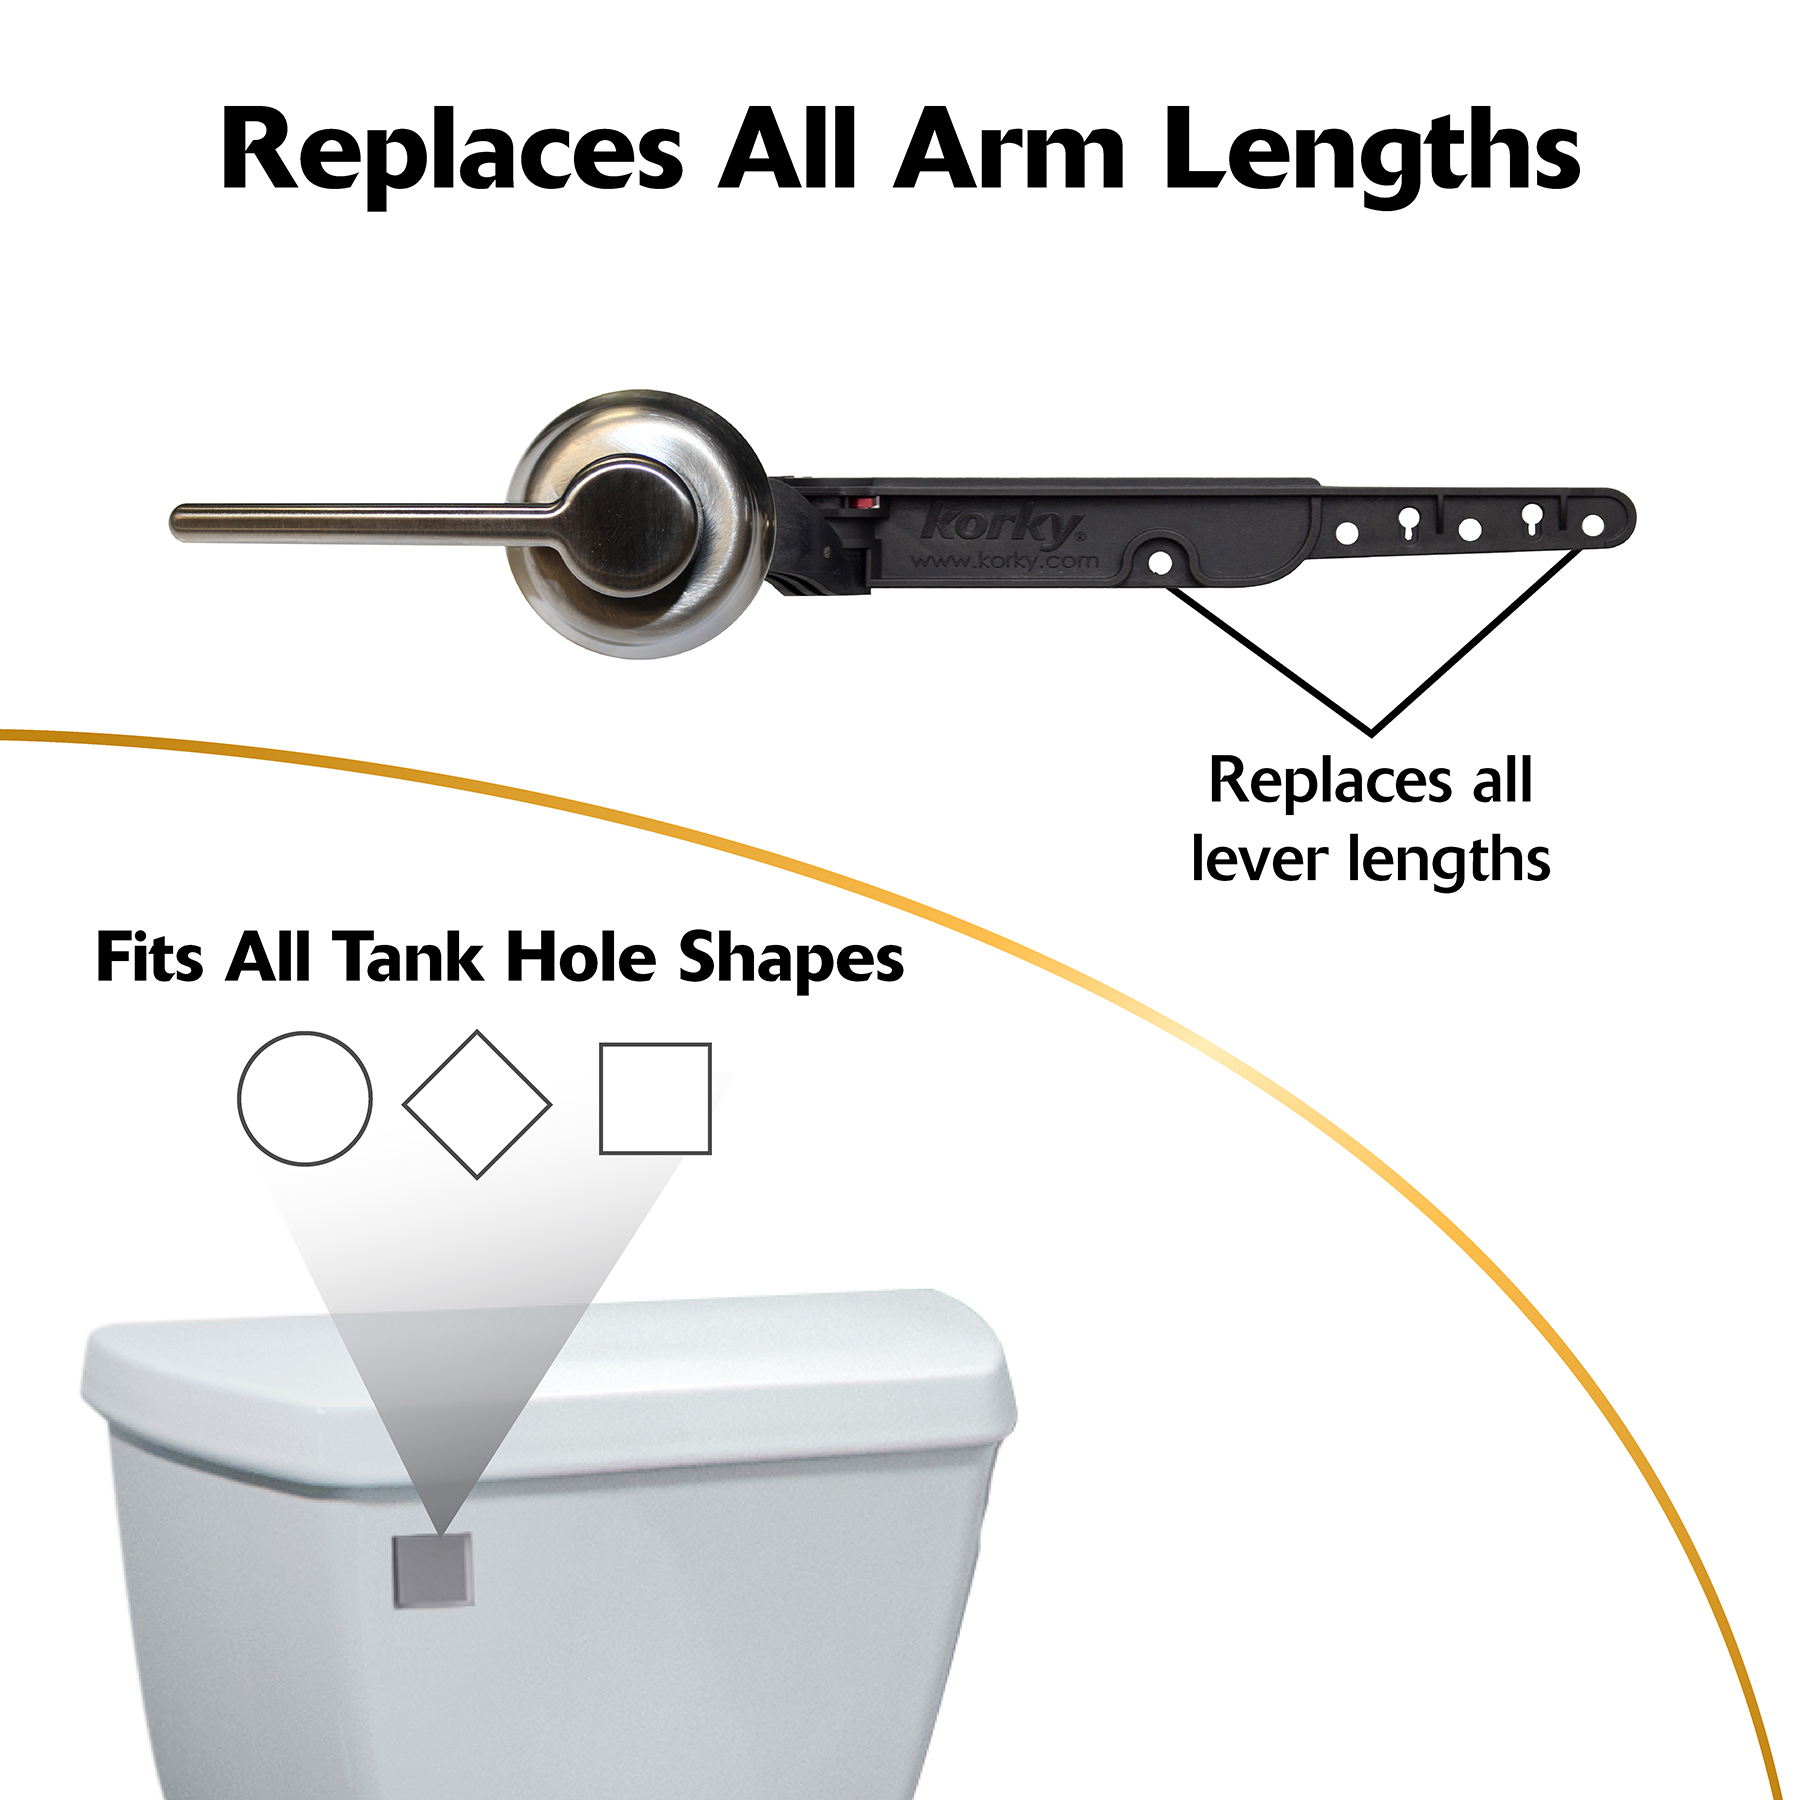 Classic brushed nickel toilet lever replaces all arm lengths and fits all tank hole shapes